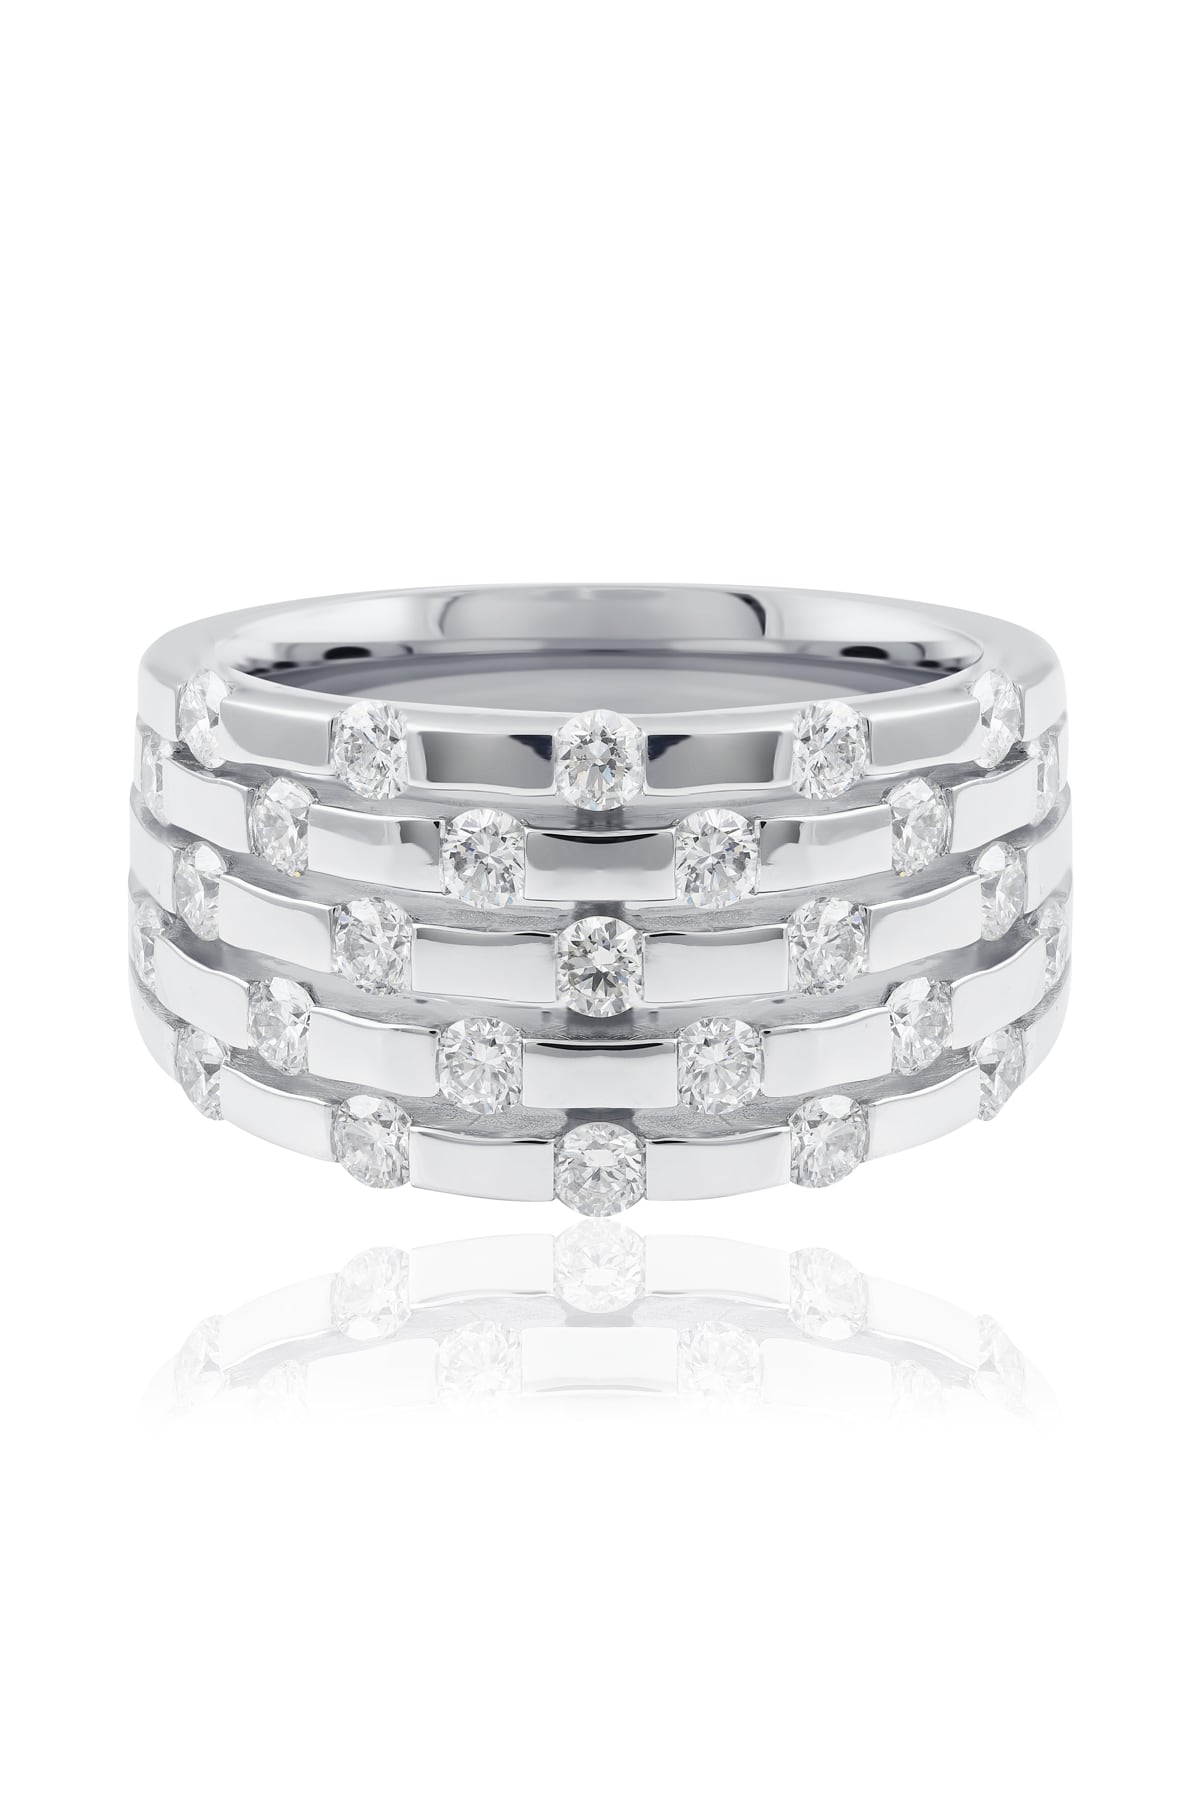 1.35 Carat Wide Diamond Dress Ring In White Gold from LeGassick Jewellery.